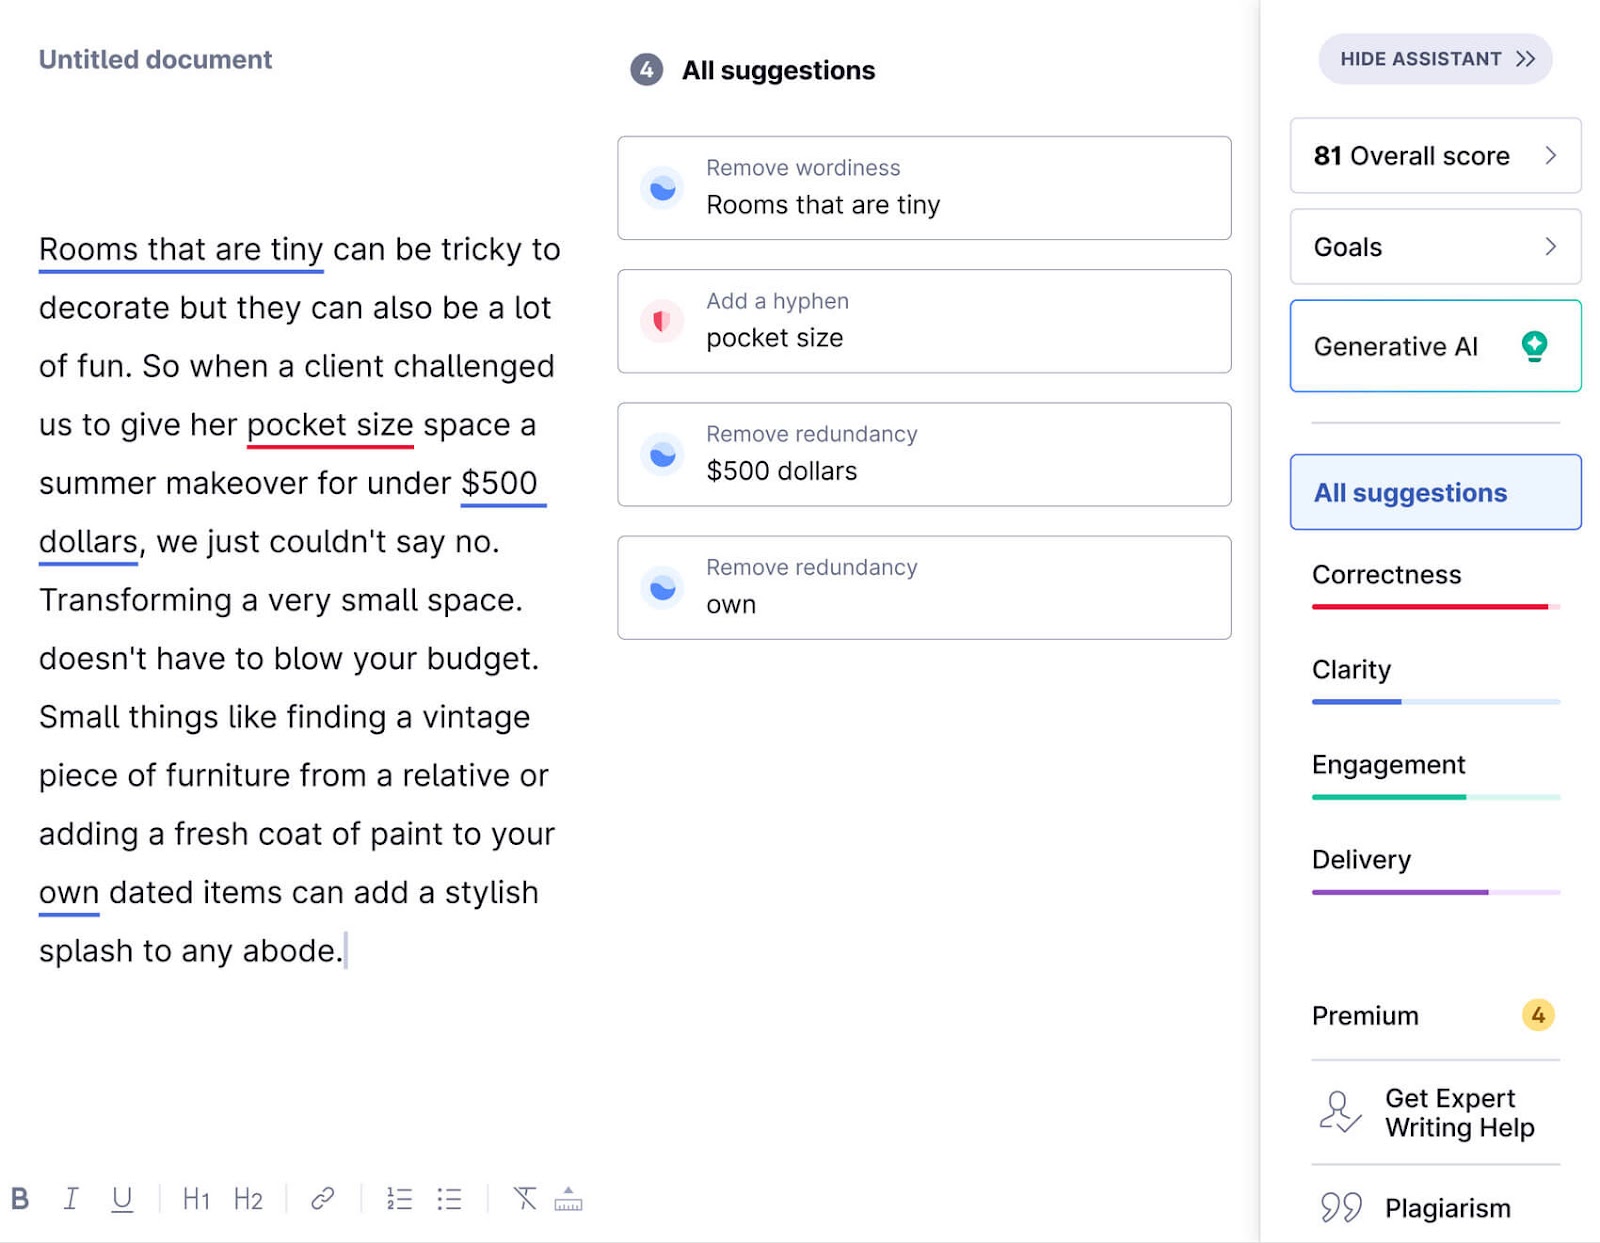 Grammarly editor showing color-coded suggestions